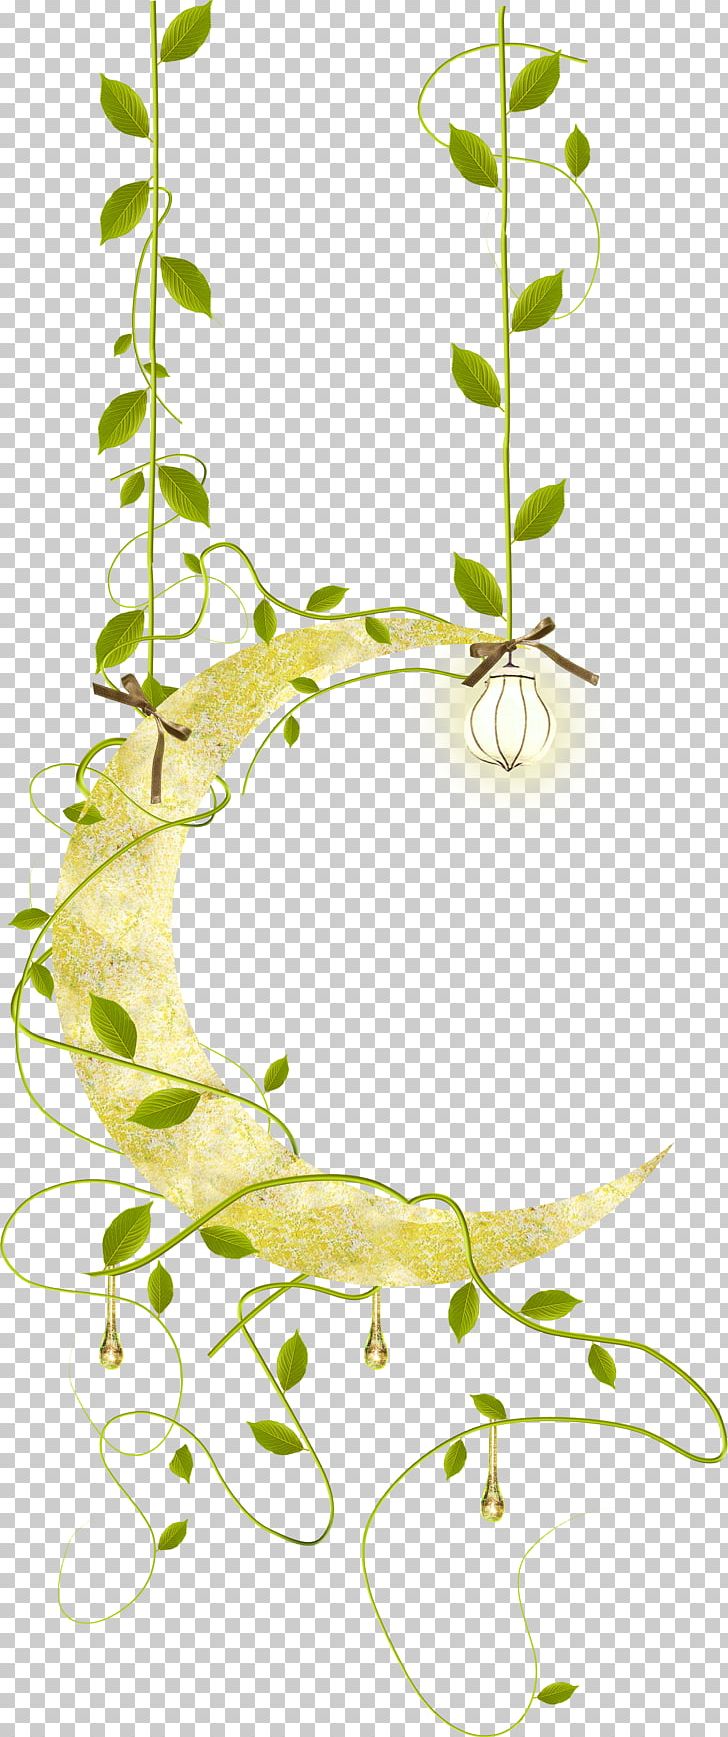 Moon Cartoon Illustration PNG, Clipart, Angle, Art, Blue Moon, Border, Branch Free PNG Download